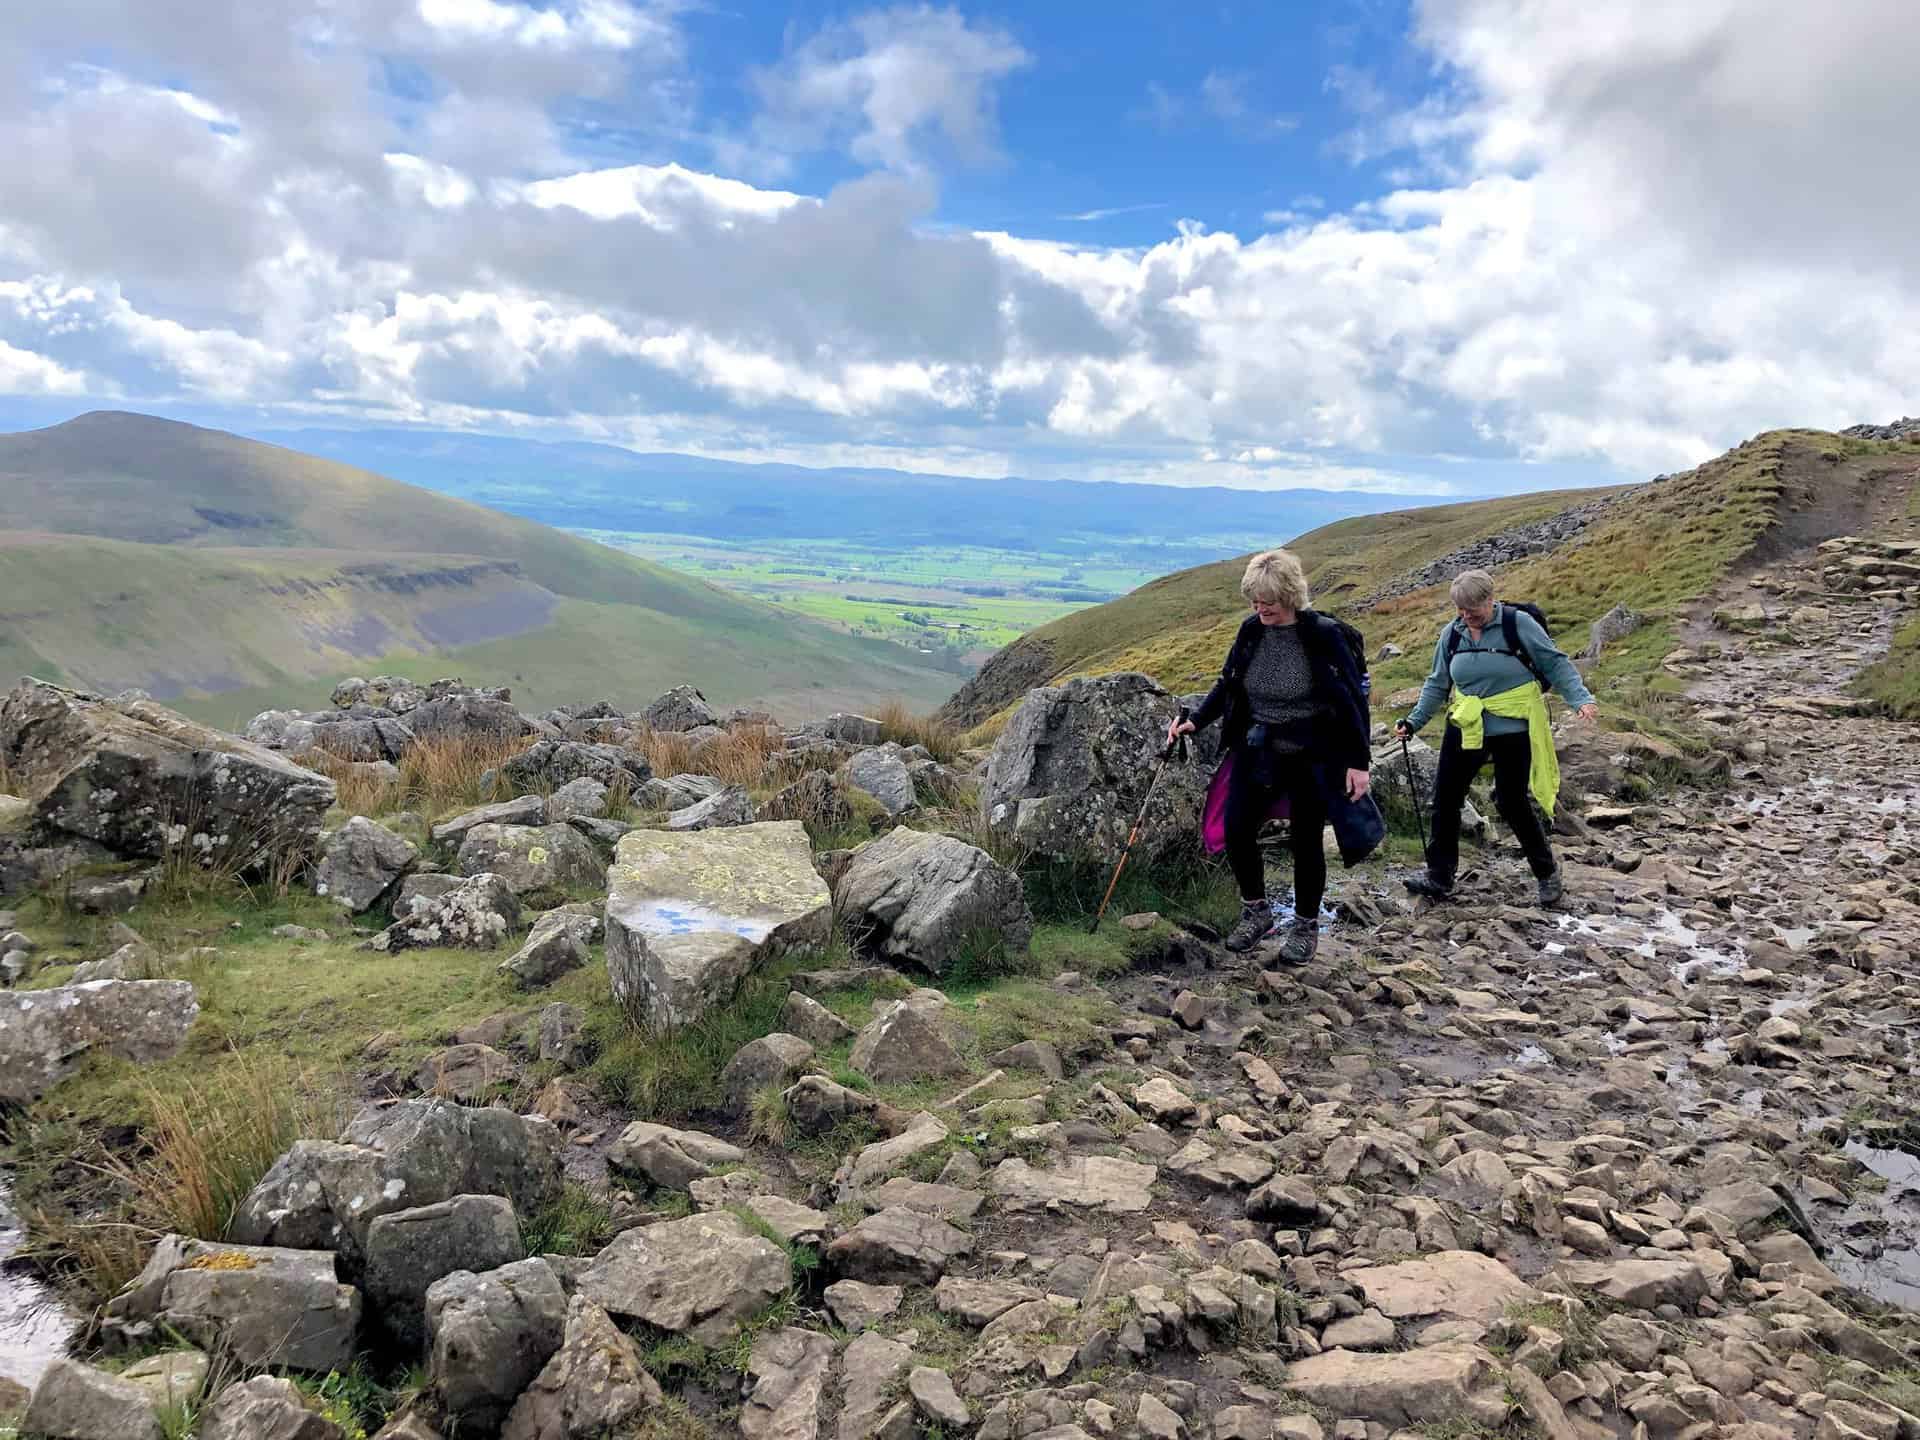 A rocky section of the Pennine Way, with the hills of the Yorkshire Dales visible on the horizon. Navigating this rocky terrain adds a sense of adventure to the High Cup Nick walk.